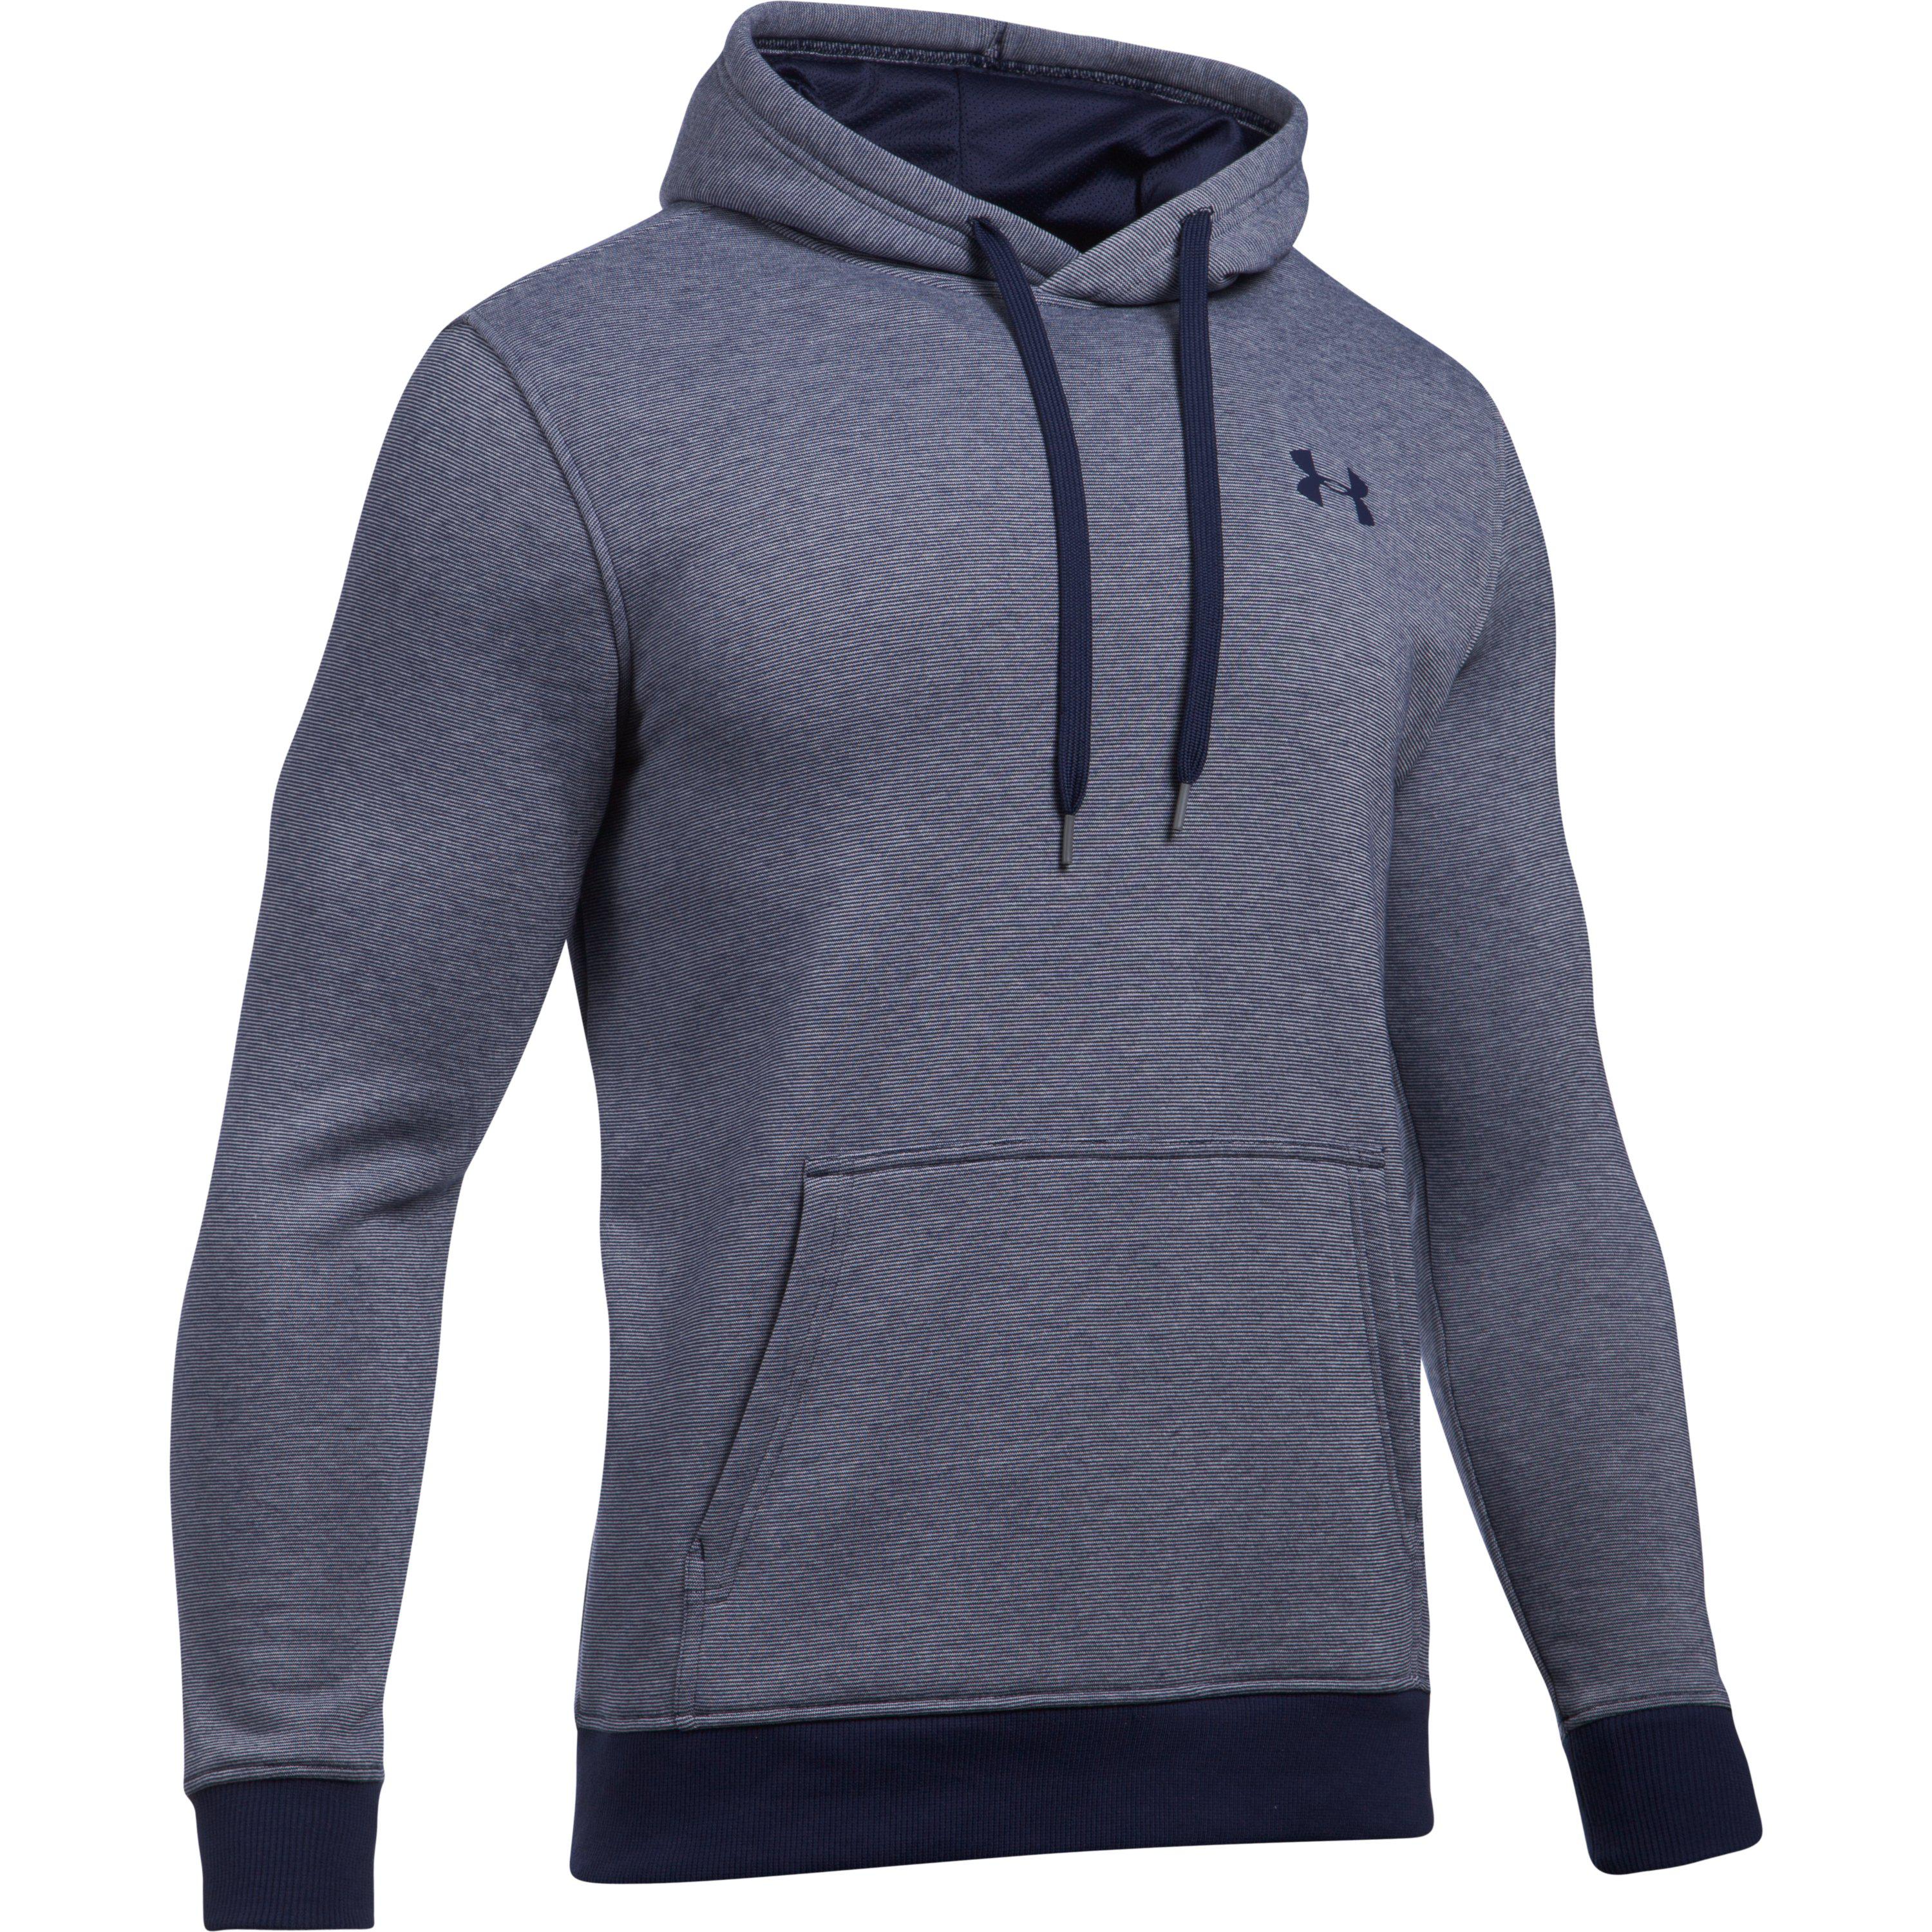 Lyst - Under Armour Men's Ua Rival Fleece Fitted Hoodie in Blue for Men